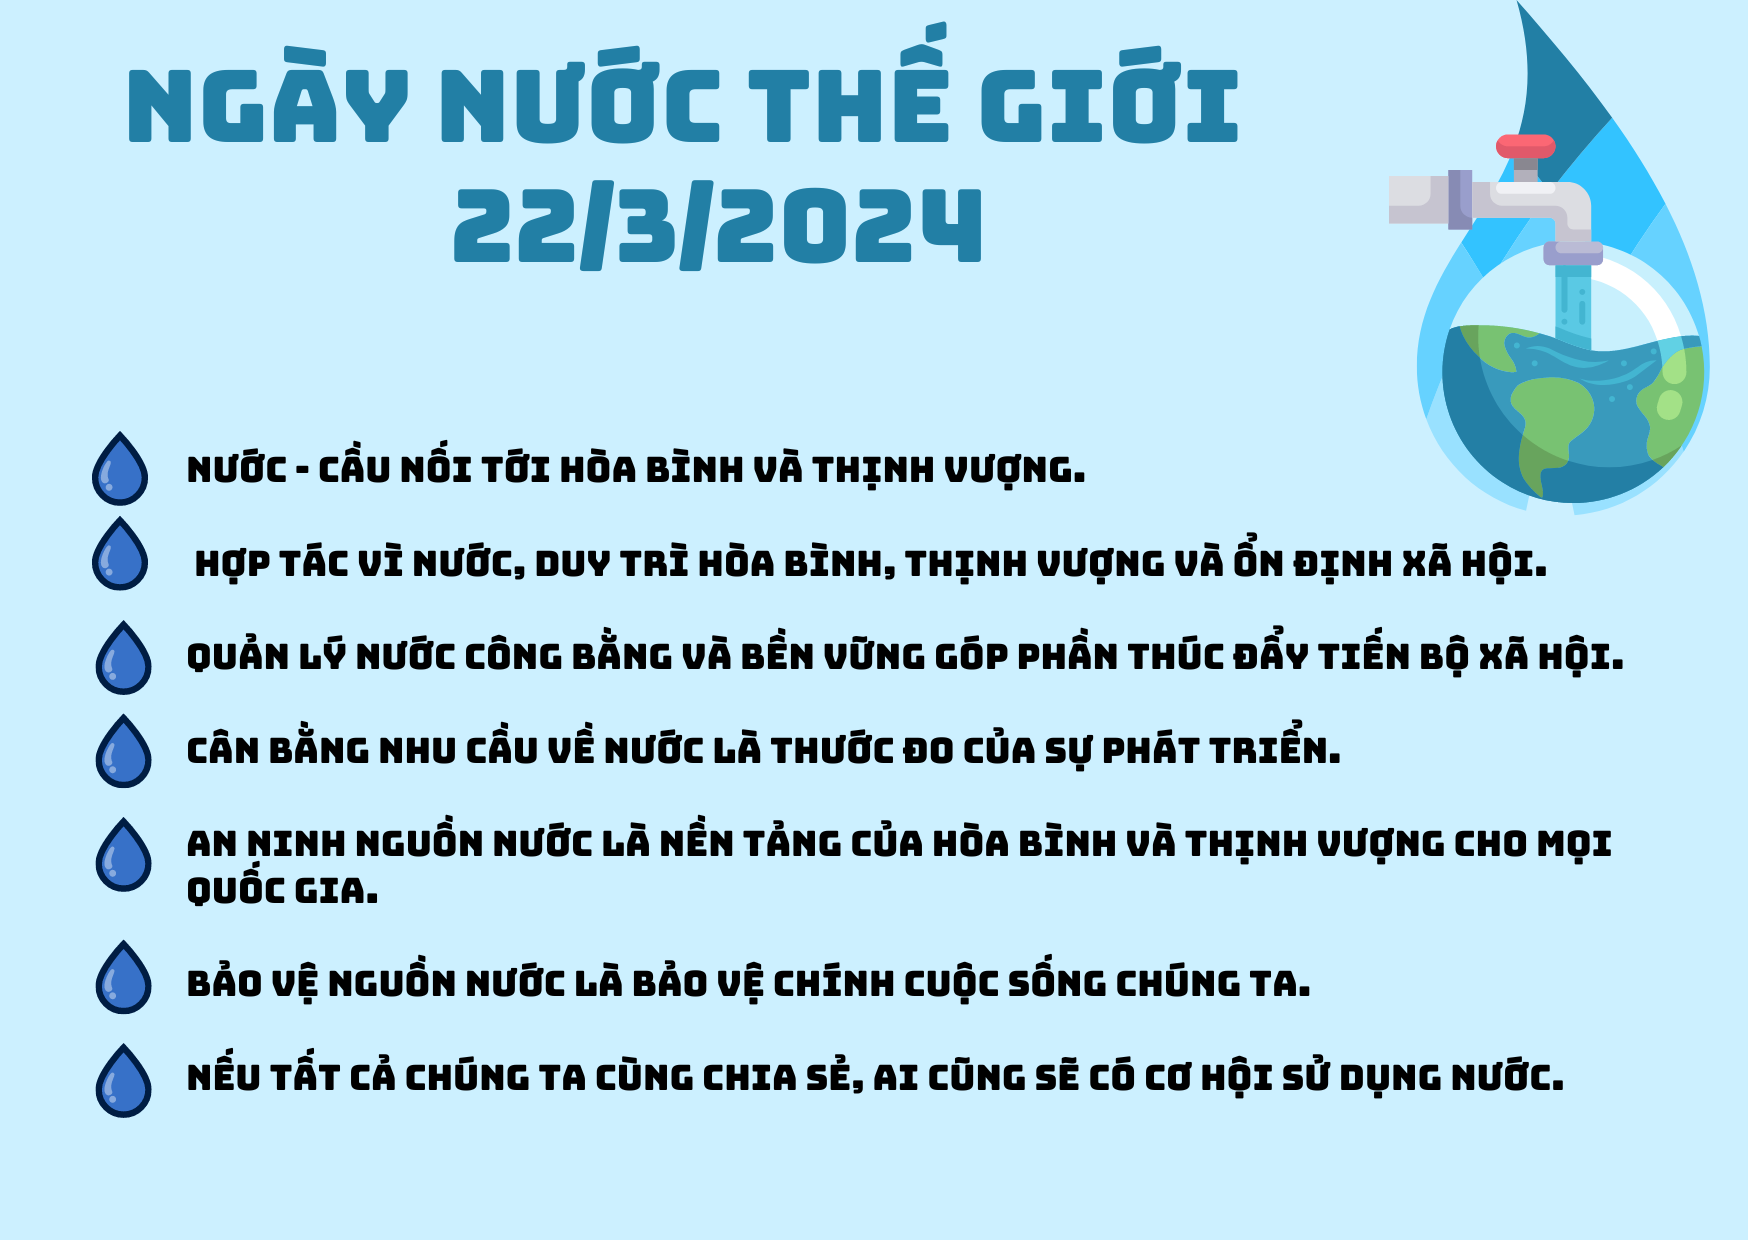 ngay-nuoc-the-g.png